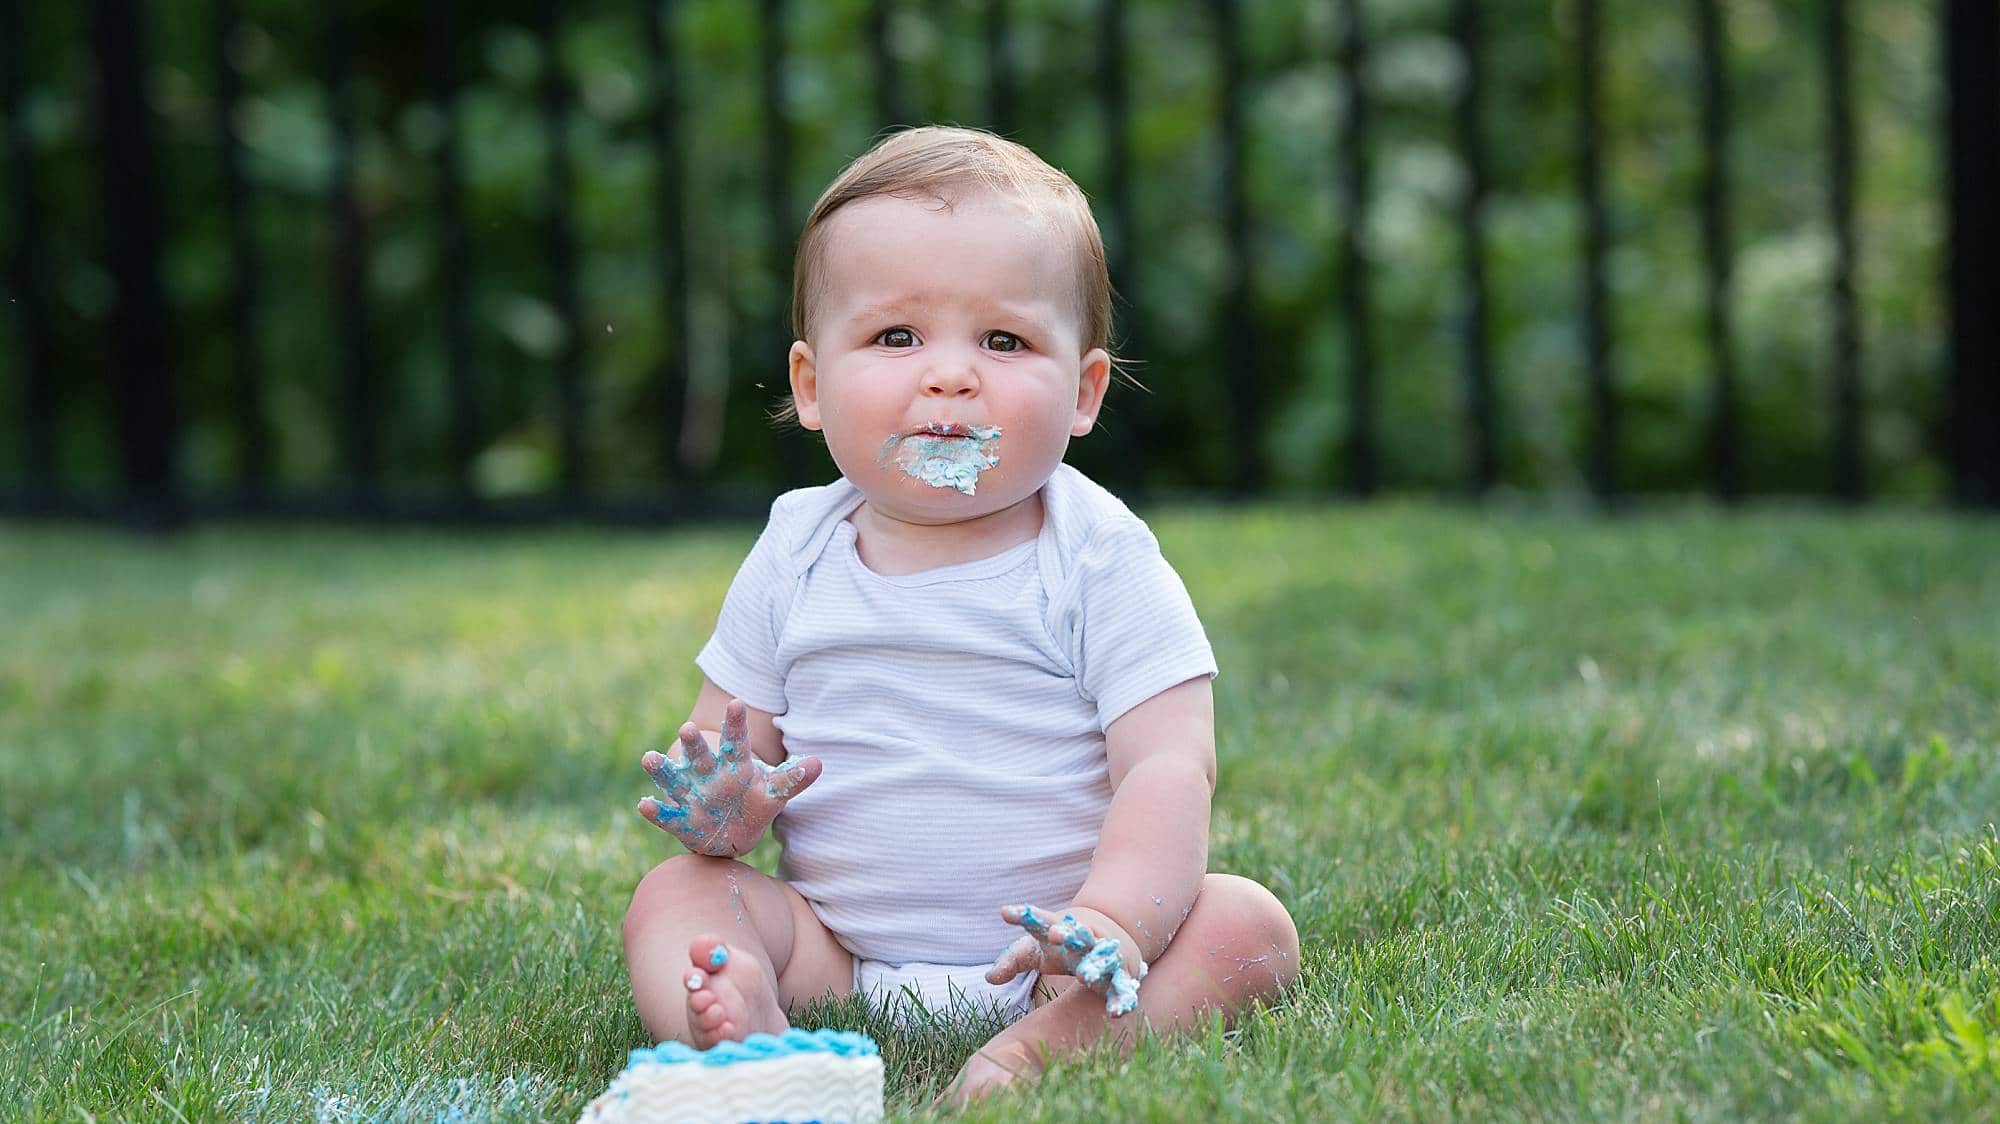 image of a baby boy with frosting on his chin sitting in a grassy yard with a birthday cake